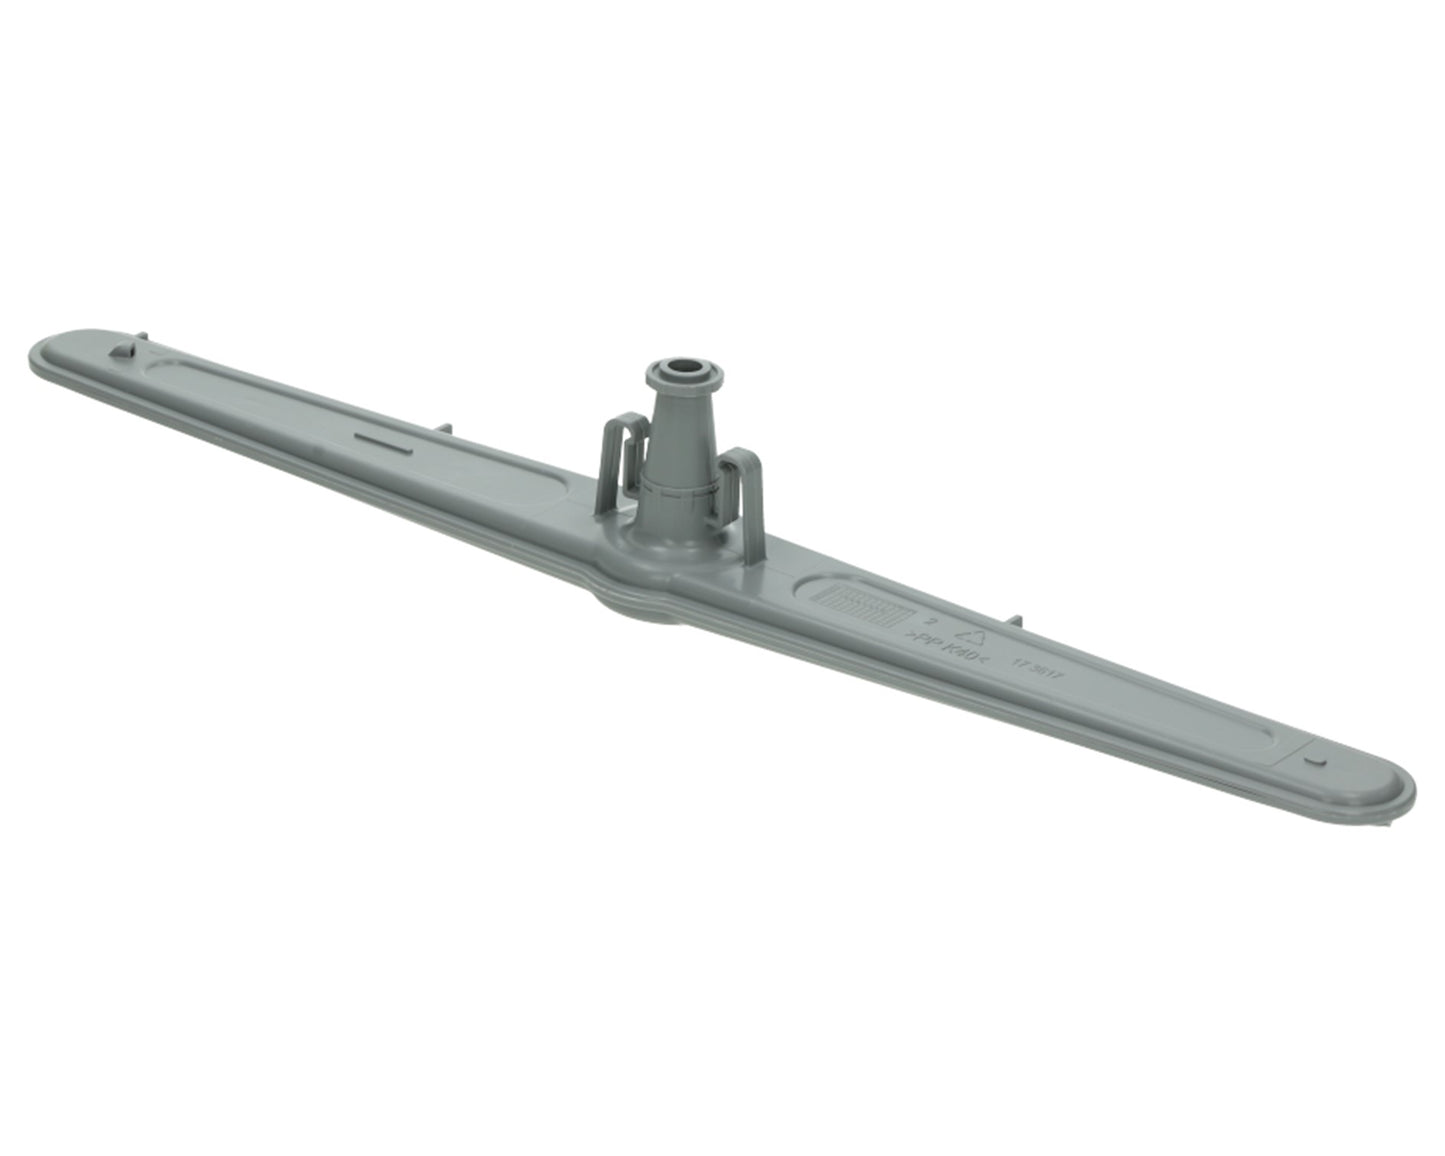 Dishwasher Lower Bottom Water Spray Arm Complete for Diplomat ADP8630, ADP8640, HJA8640